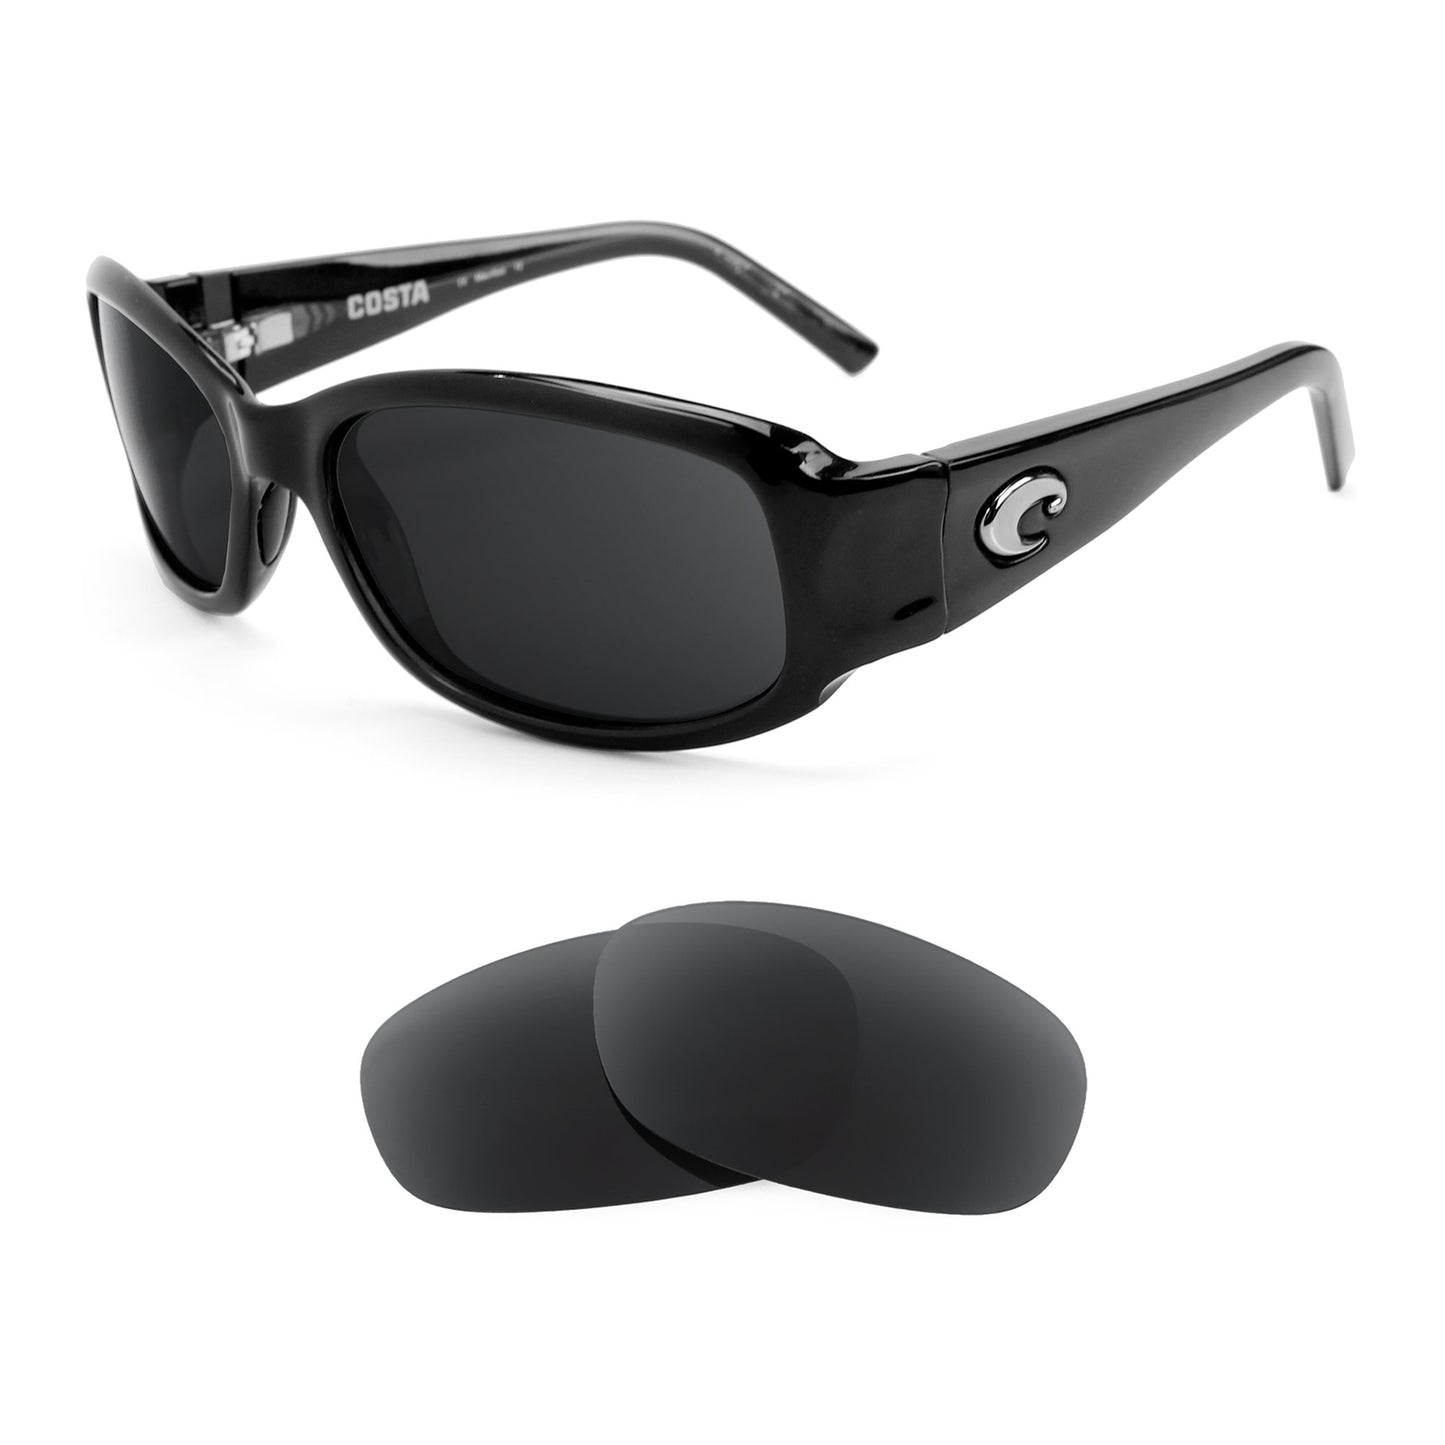 Costa Vela sunglasses with replacement lenses